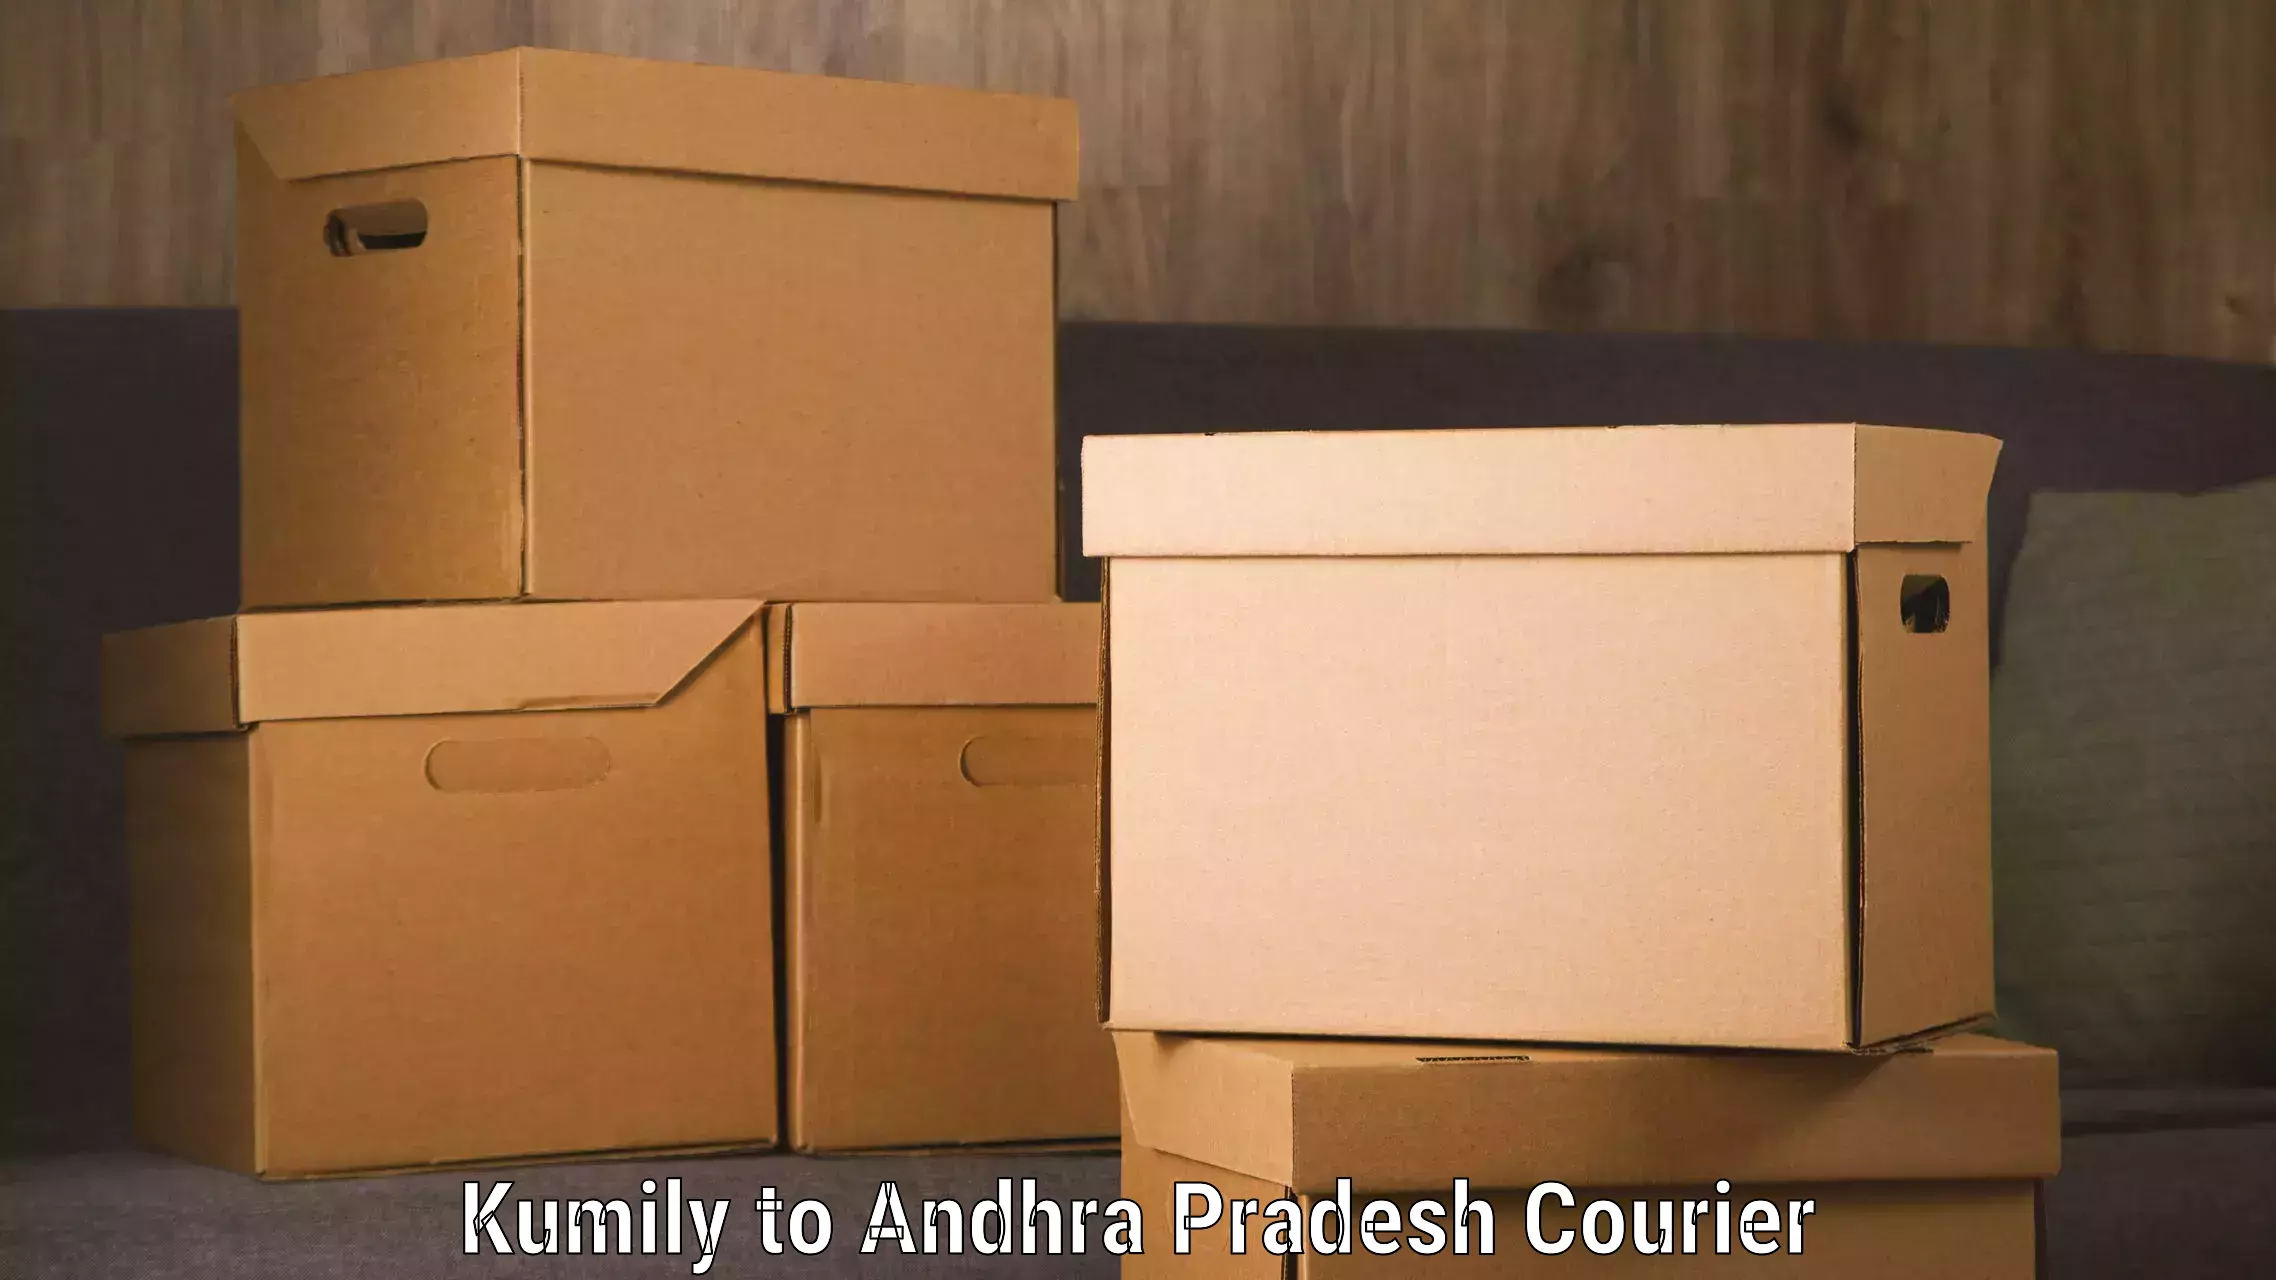 State-of-the-art courier technology in Kumily to Challapalli